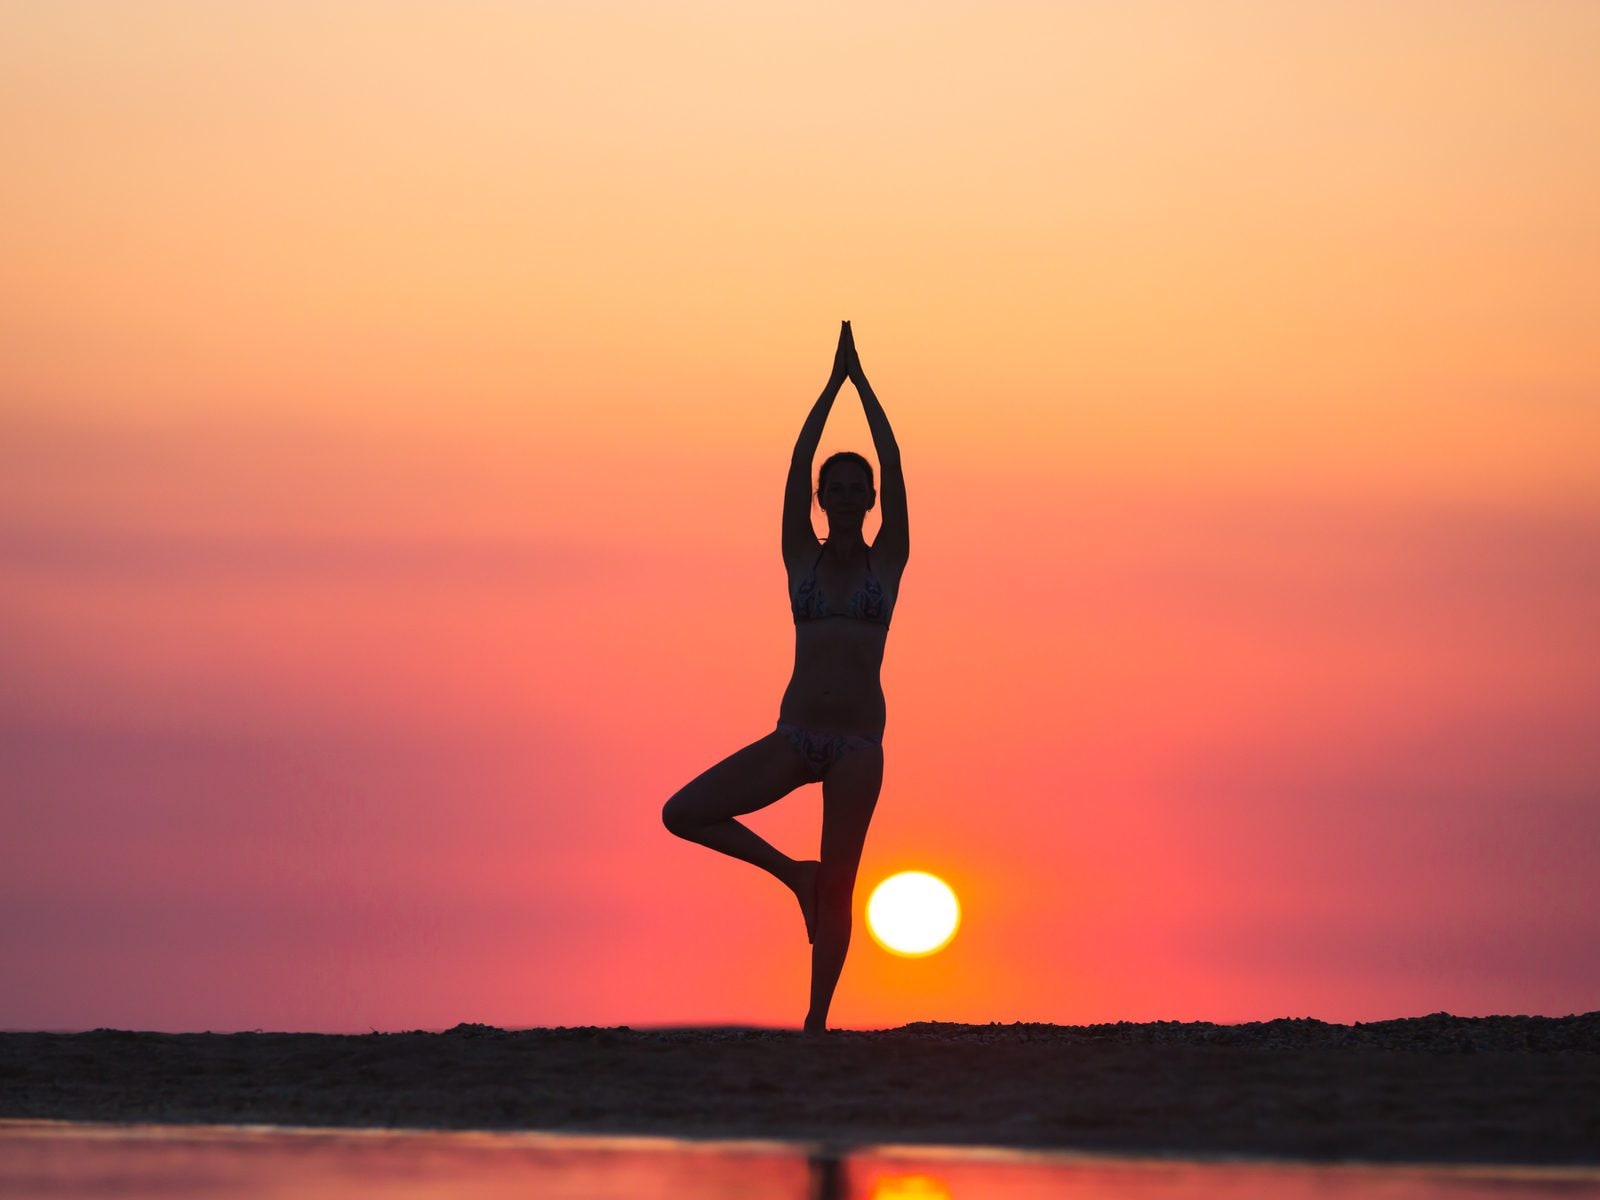 5 Easy Pre-Surf Yoga Poses to Warm Your Body Up | The Inertia